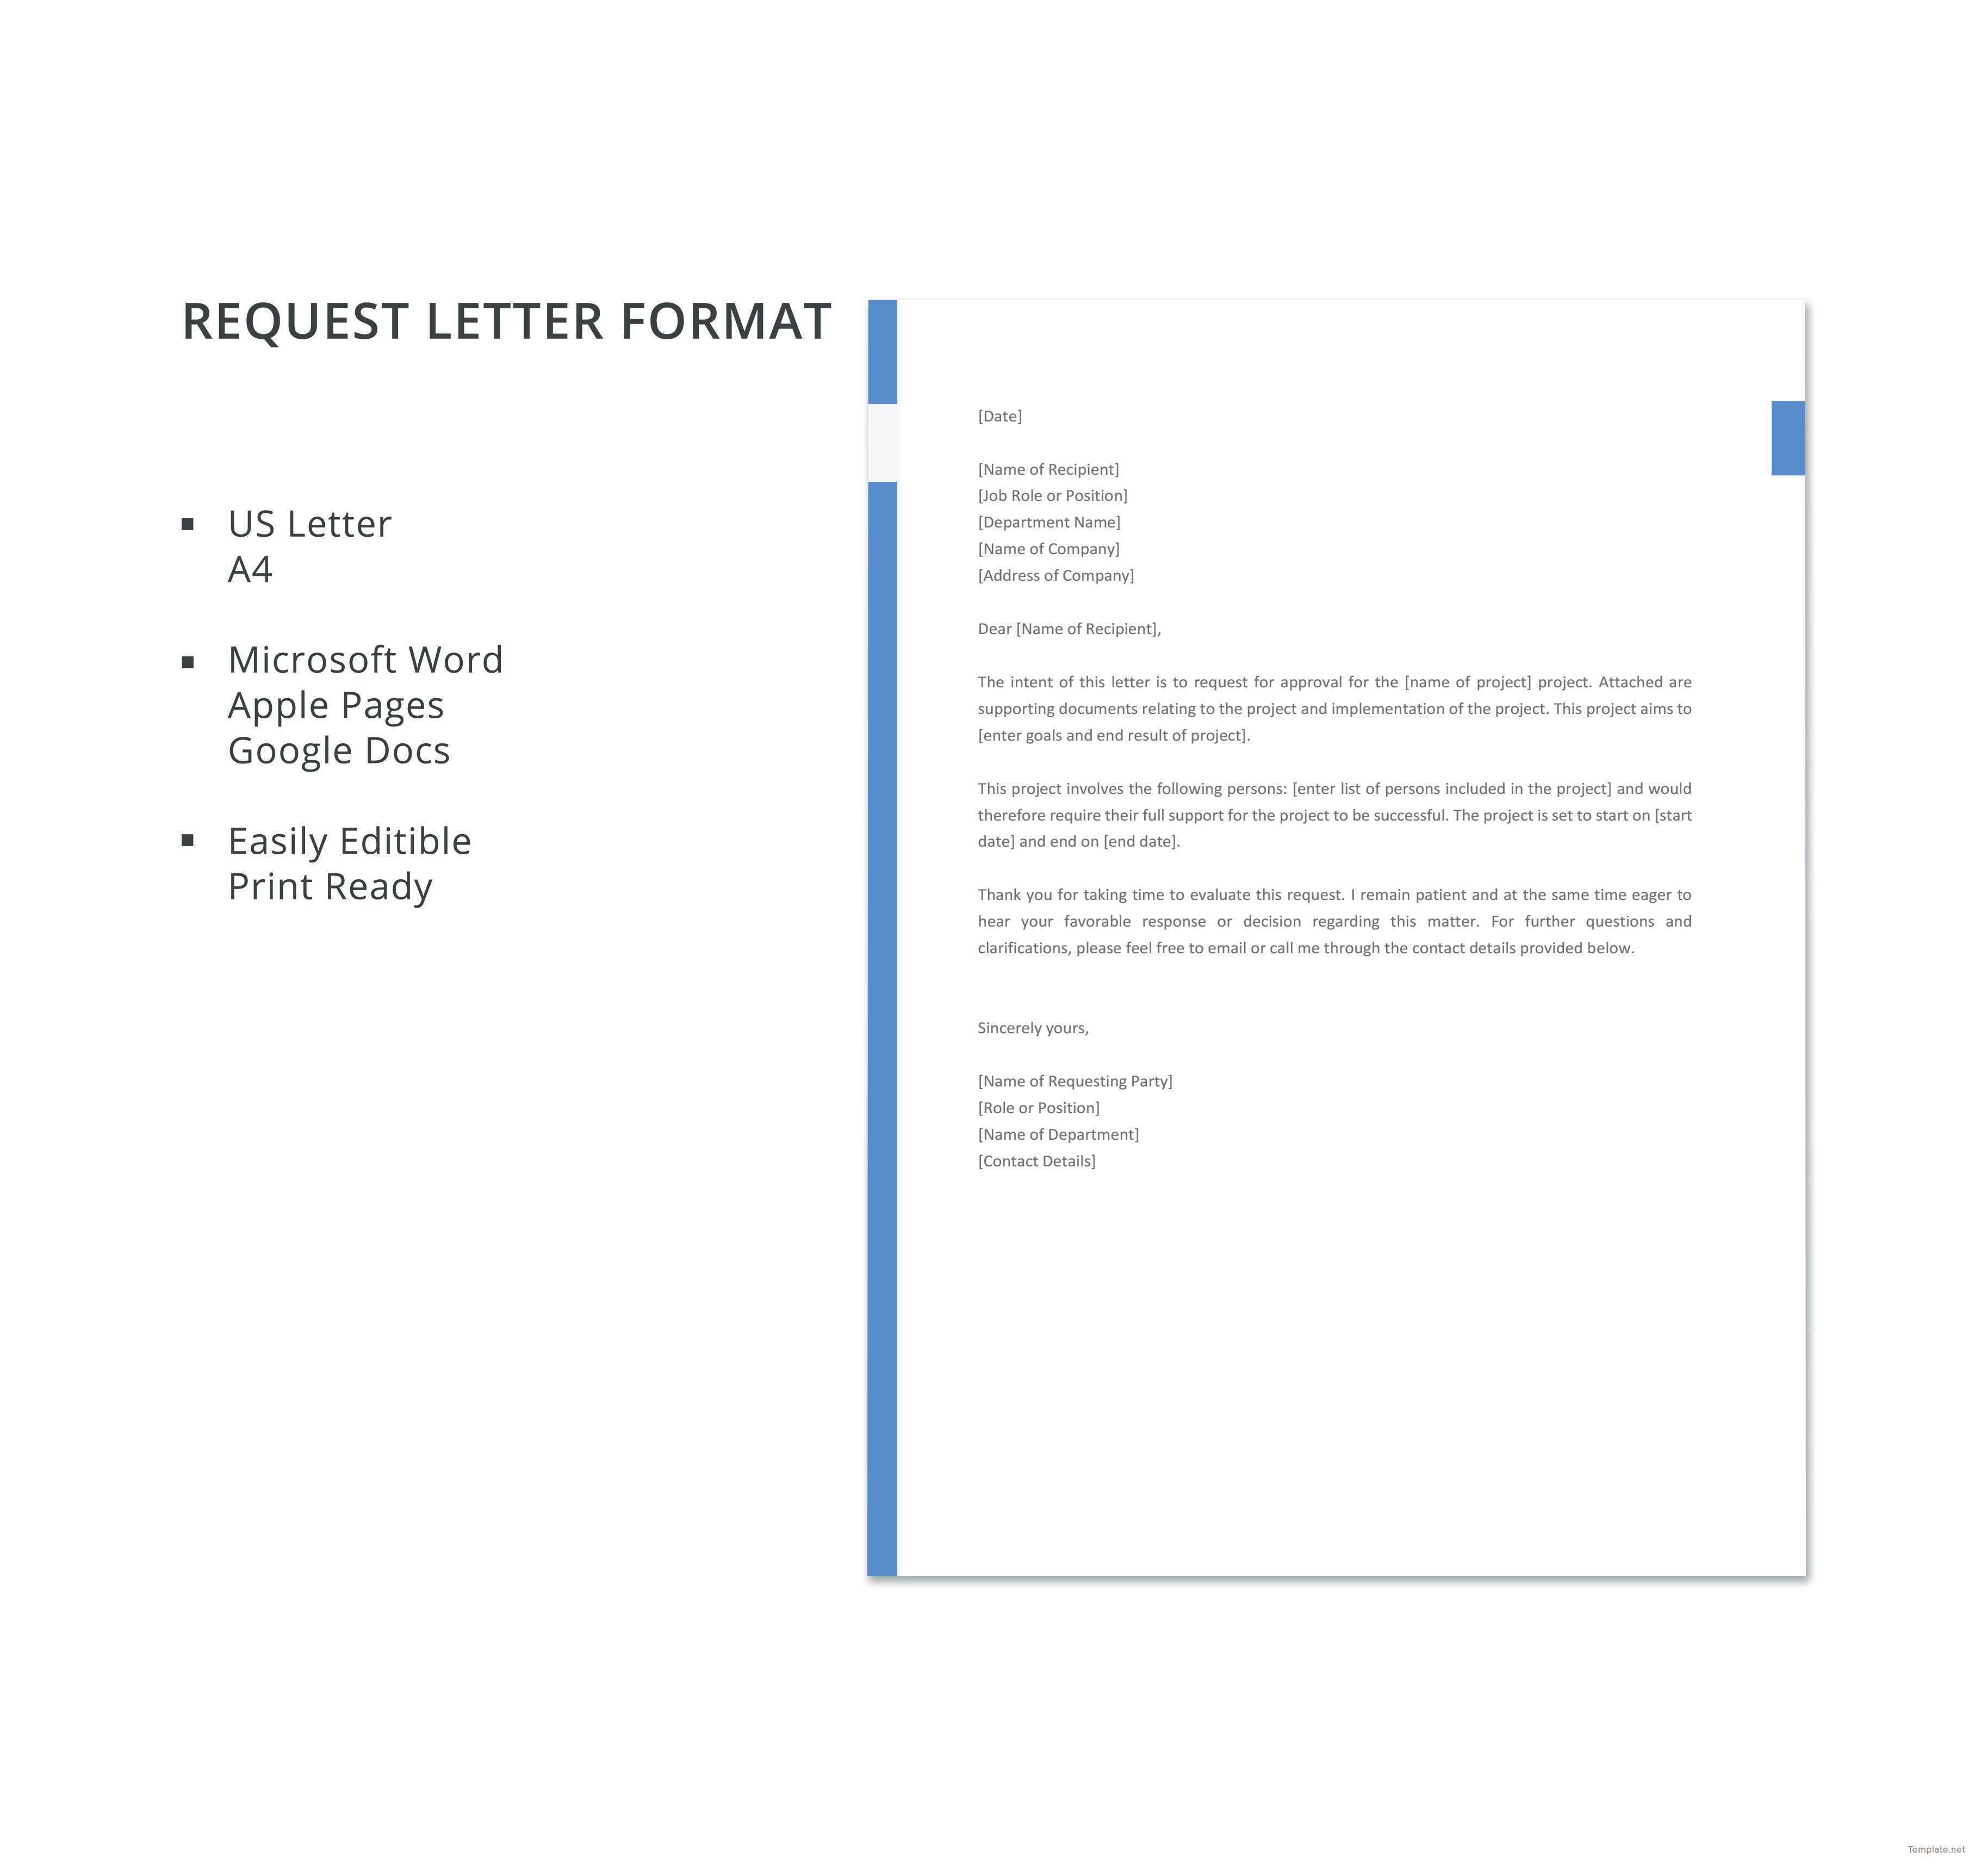 Free Request Letter Format in Microsoft Word, Apple Pages, Google Docs